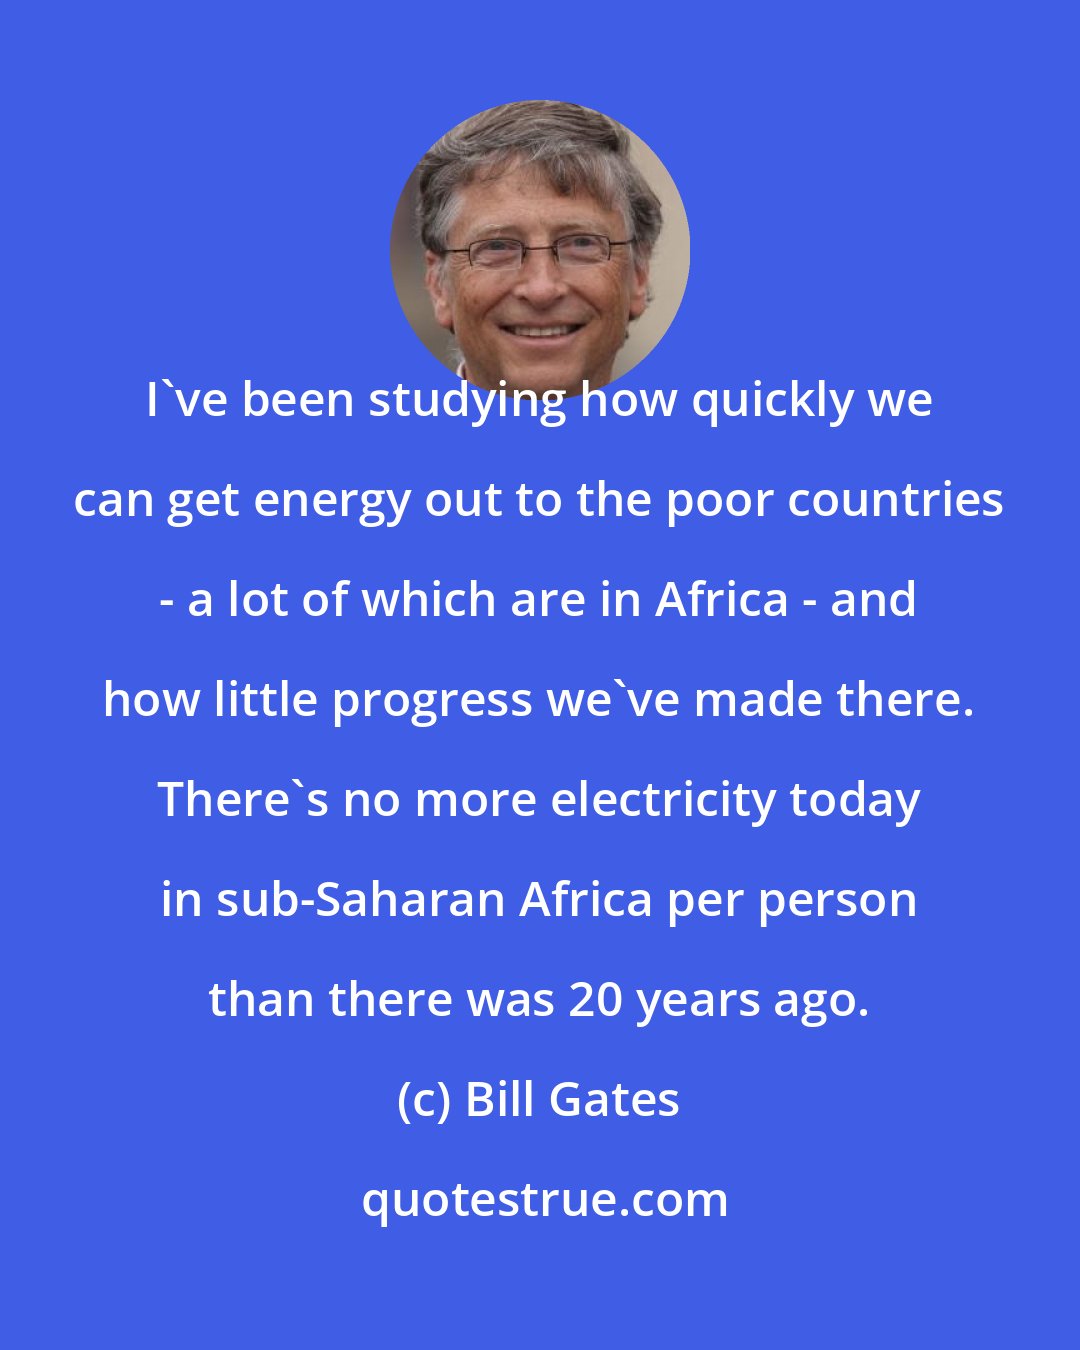 Bill Gates: I've been studying how quickly we can get energy out to the poor countries - a lot of which are in Africa - and how little progress we've made there. There's no more electricity today in sub-Saharan Africa per person than there was 20 years ago.